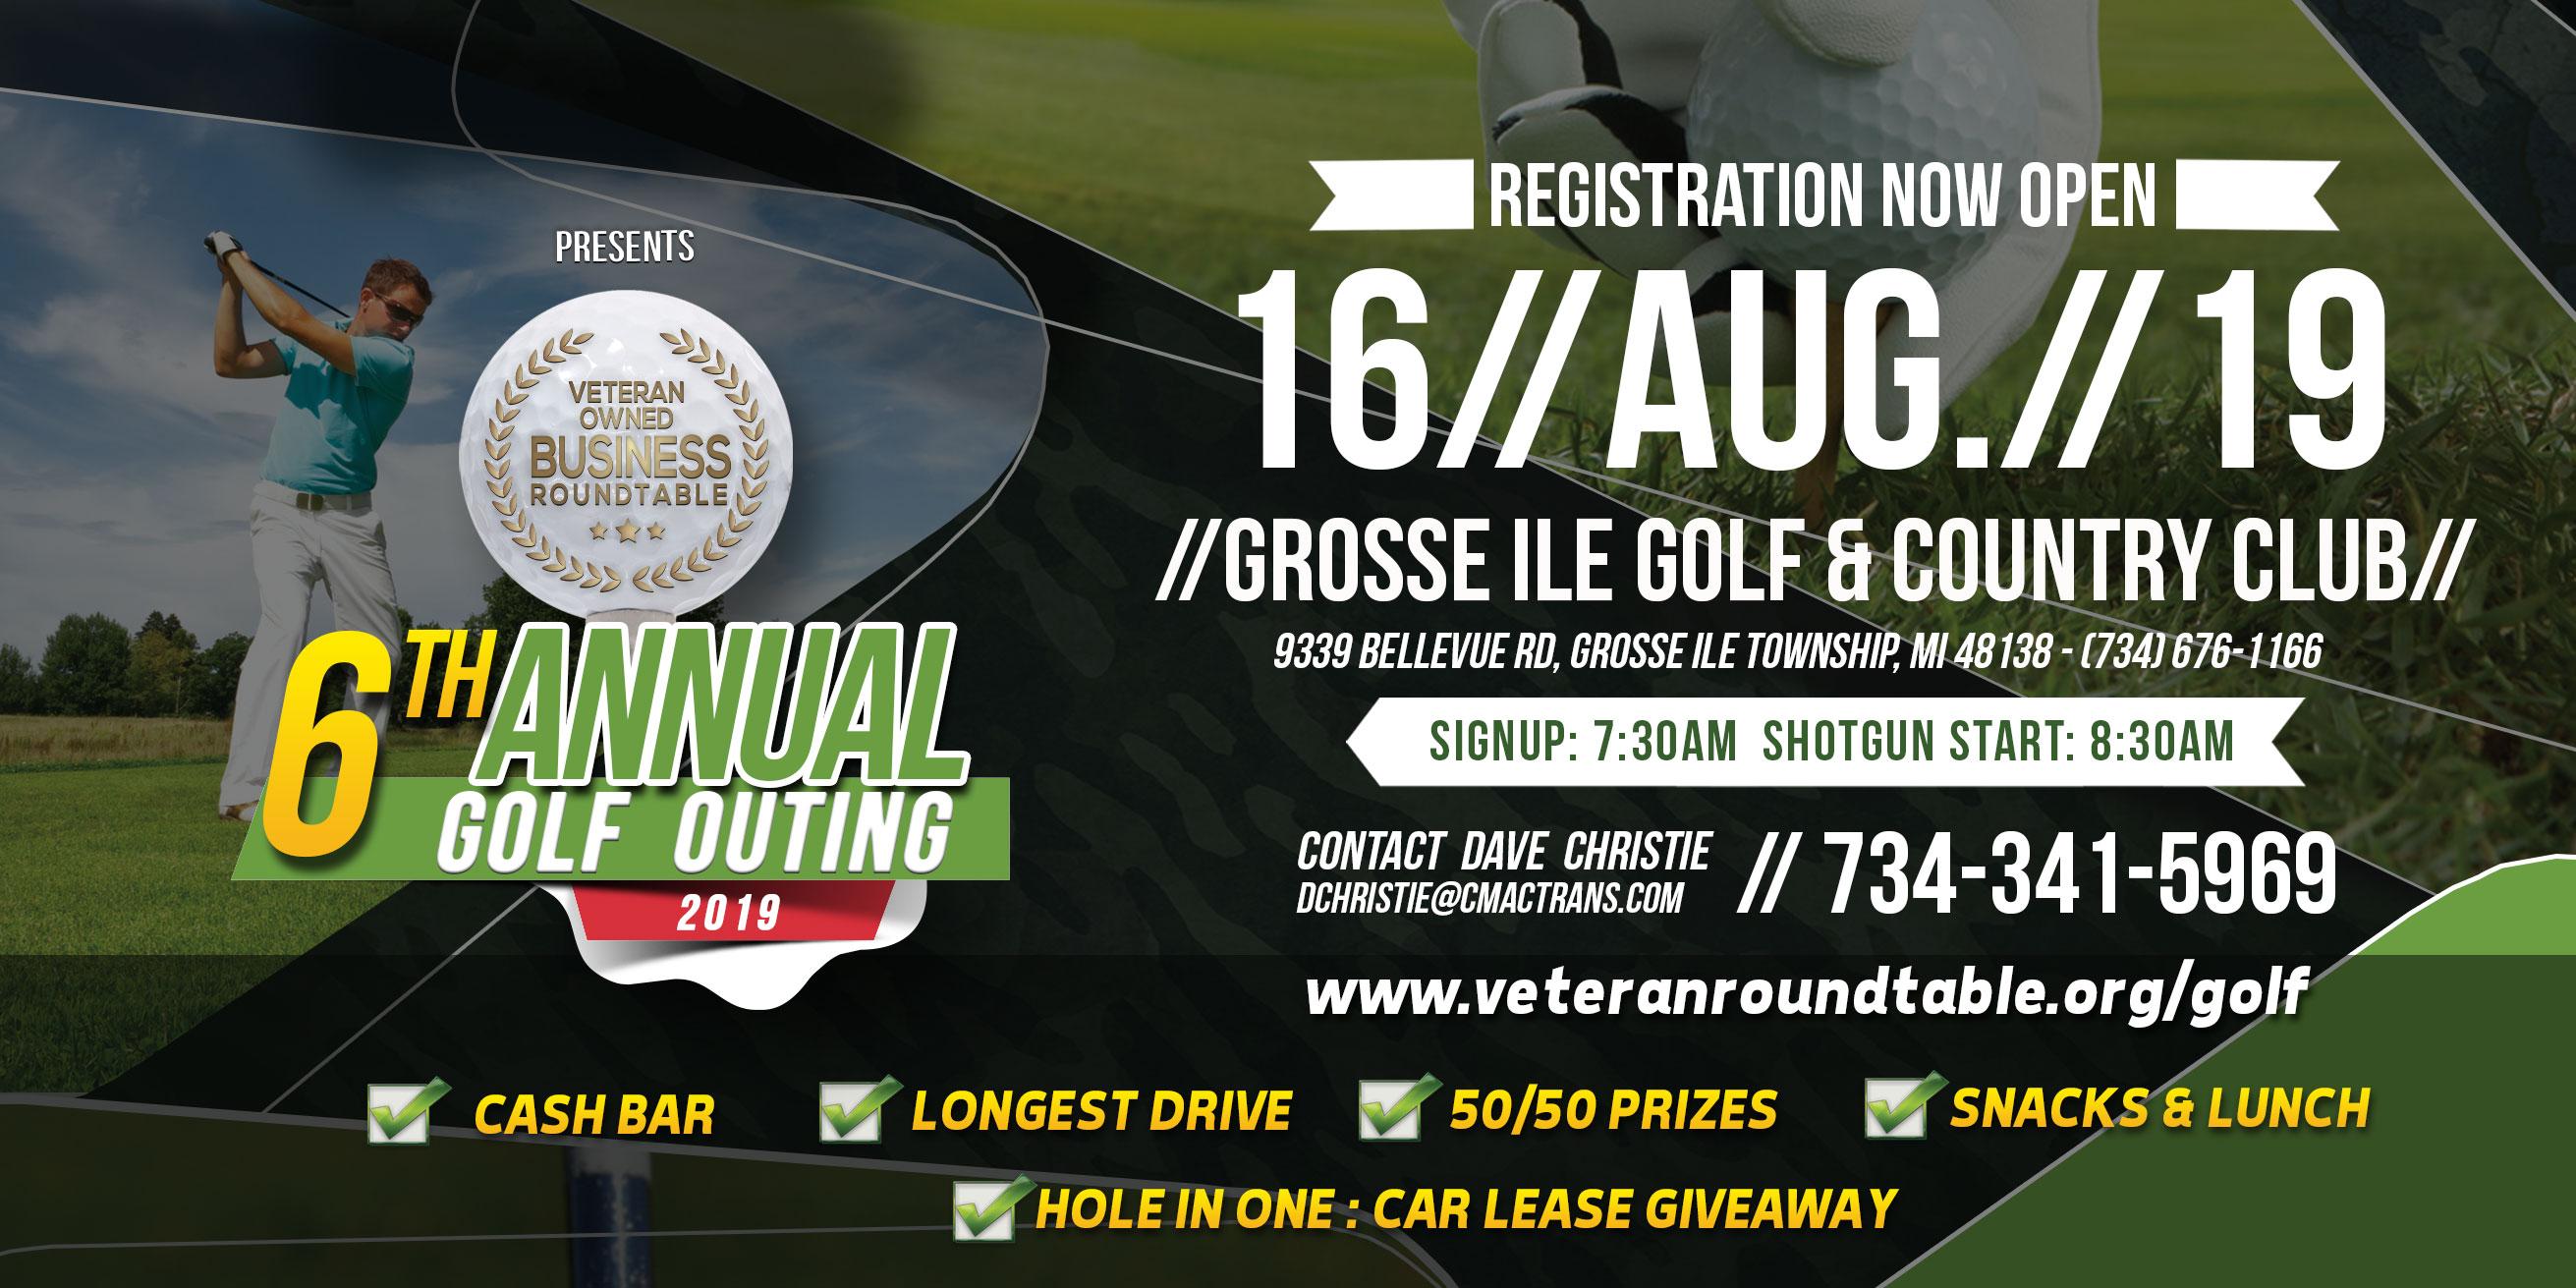 6th Annual Veteran Owned Business Round Table Golf Outing 2019